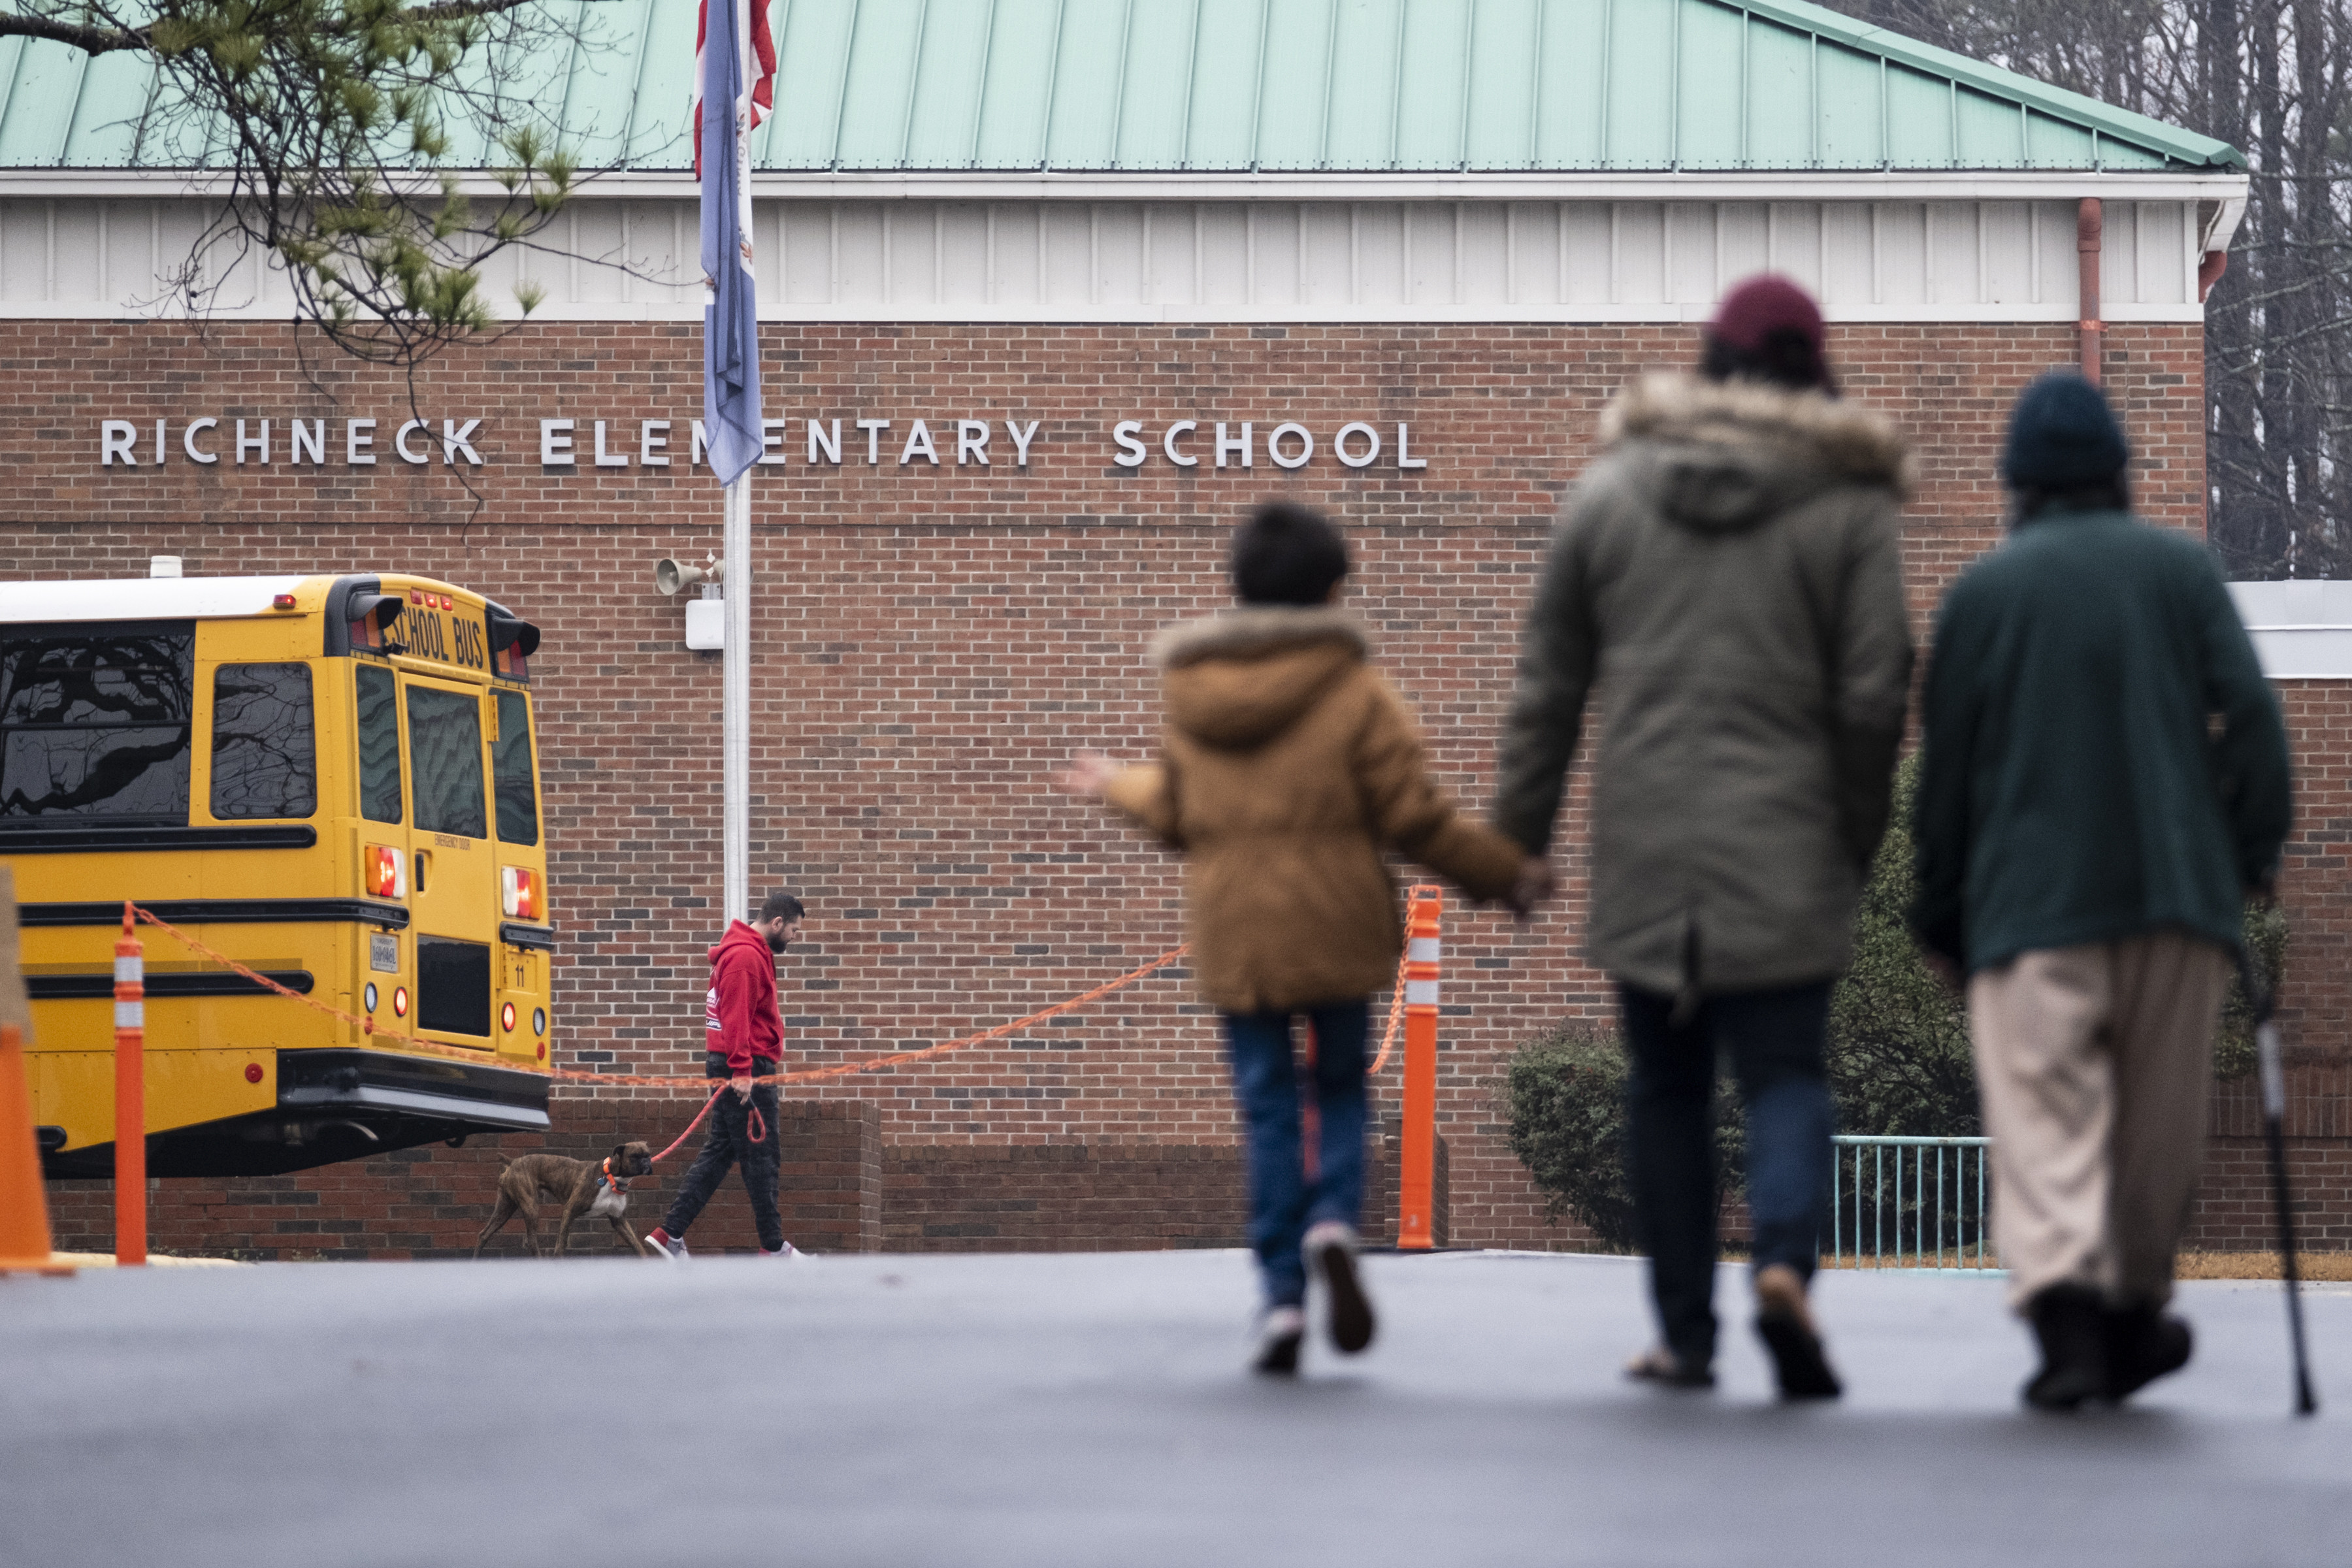 The shooting rattled the military shipbuilding community and sent shock waves around the country, with many wondering how a child so young could get access to a gun and shoot his teacher. Photo: via AP